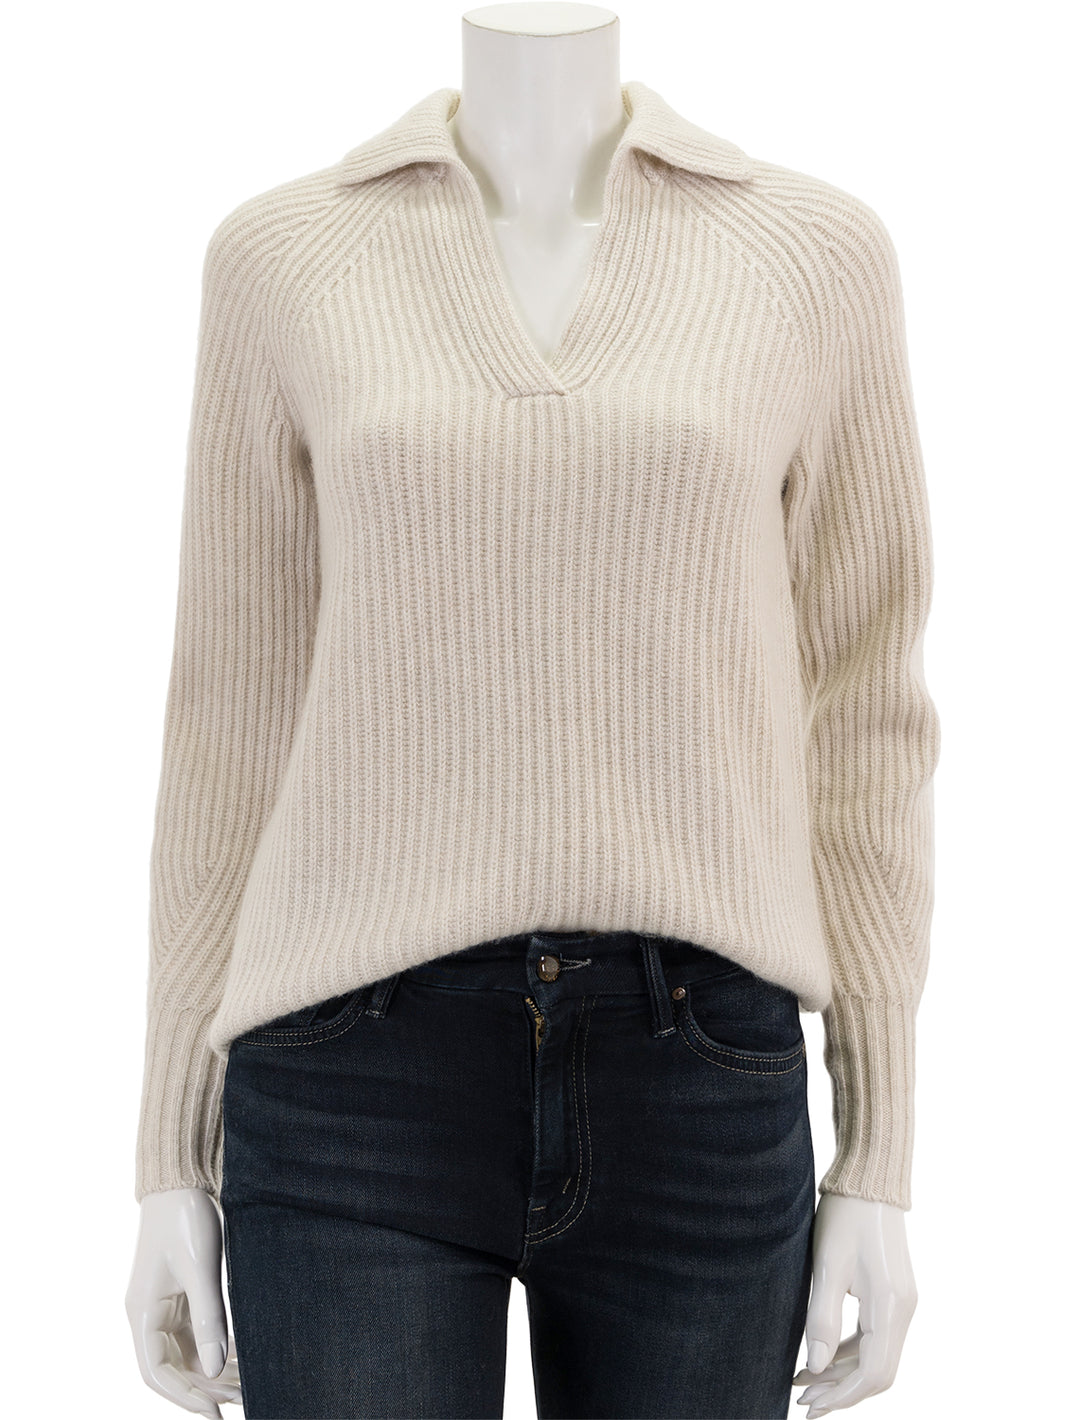 Front view of Ann Mashburn's blair johnny collar sweater in heather wheat.